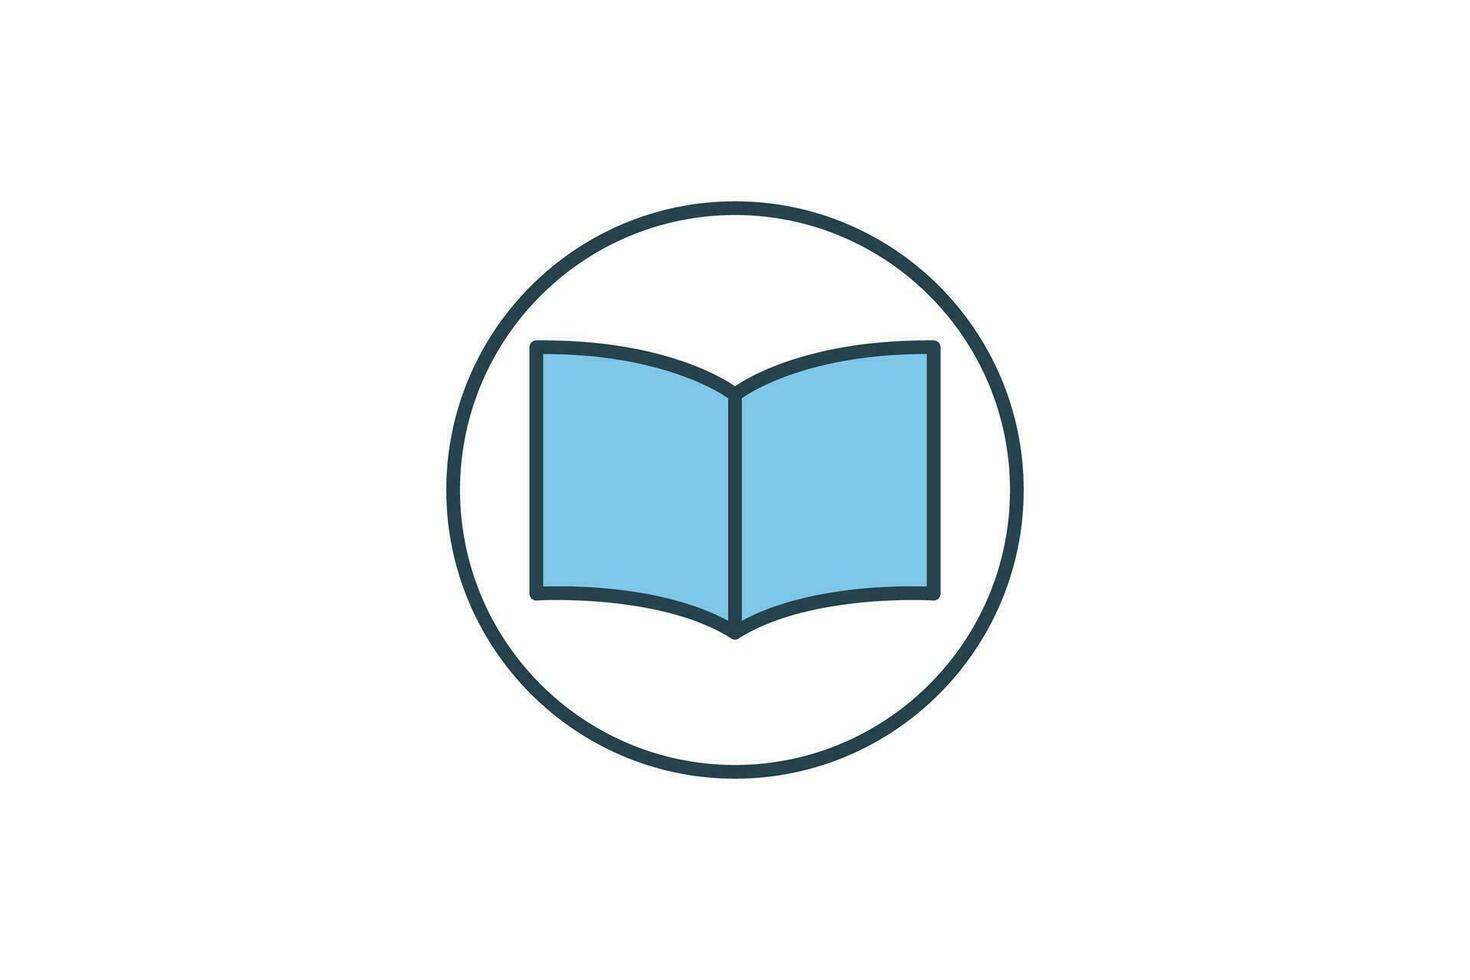 Open book icon. Icon related to research or knowledge. icon suitable for web site design, app, user interfaces, printable etc. Flat line icon style. Simple vector design editable